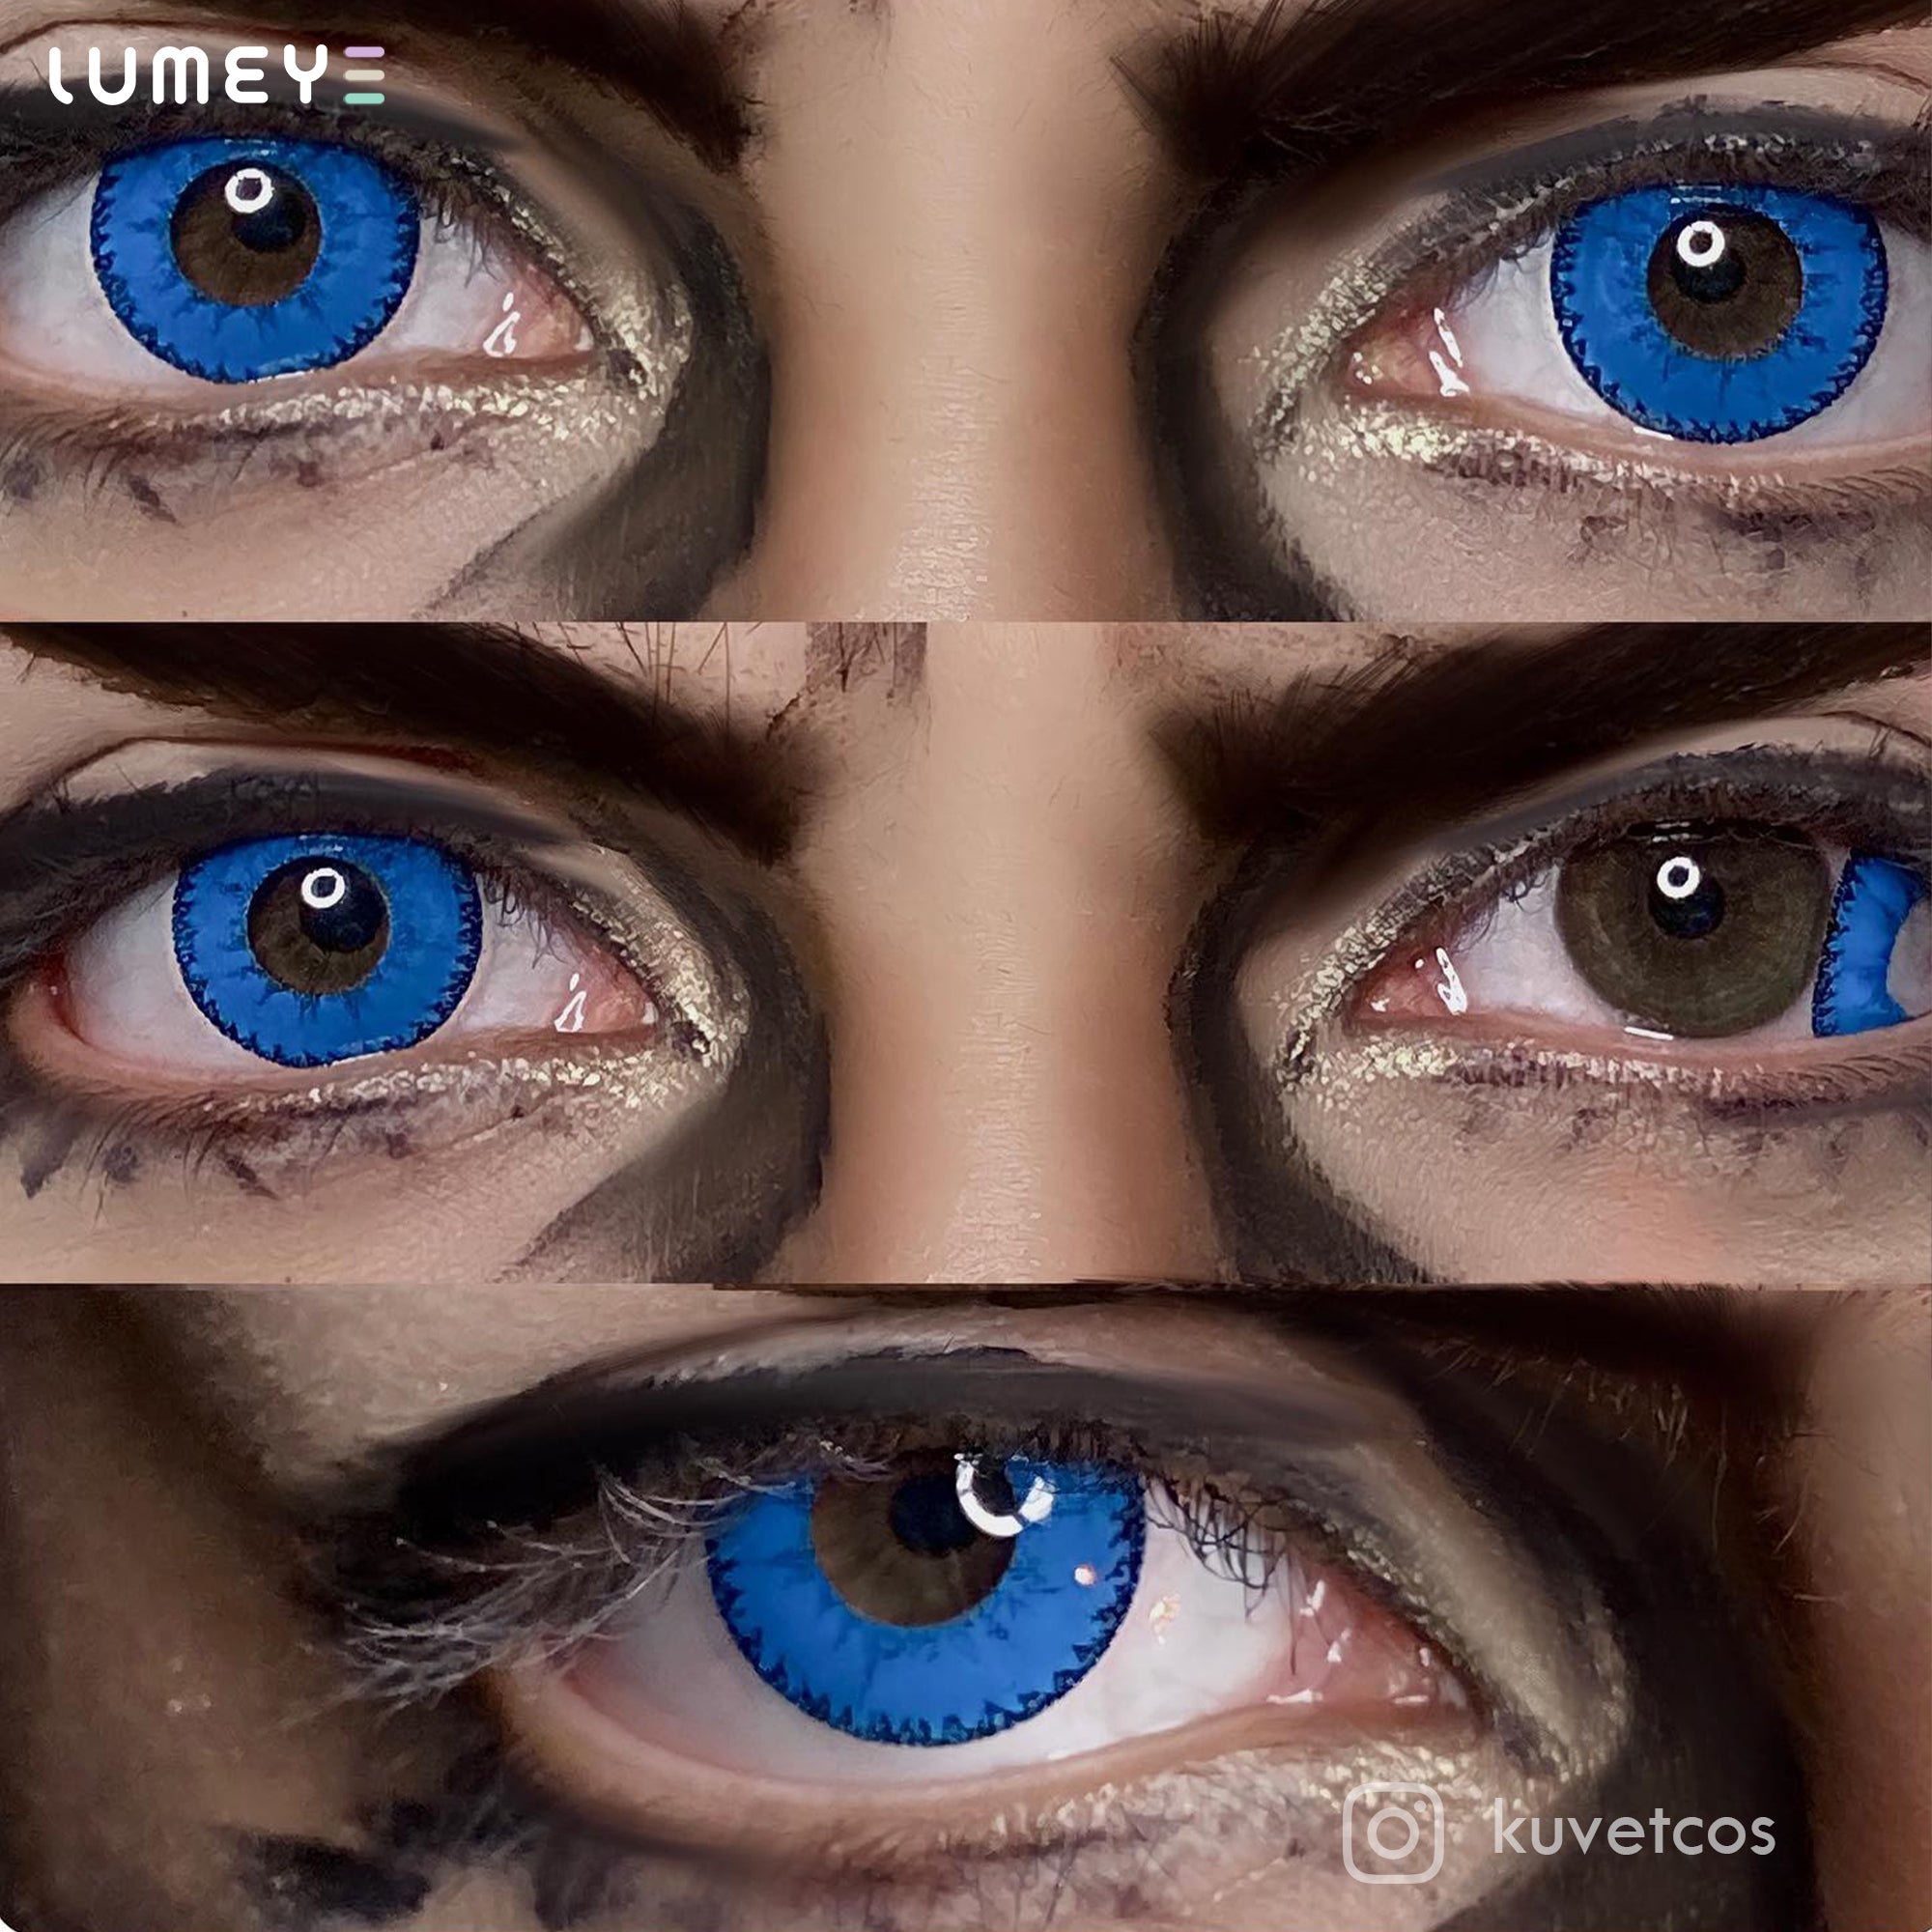 Best COLORED CONTACTS - LUMEYE Demon Blue Colored Contact Lenses - LUMEYE